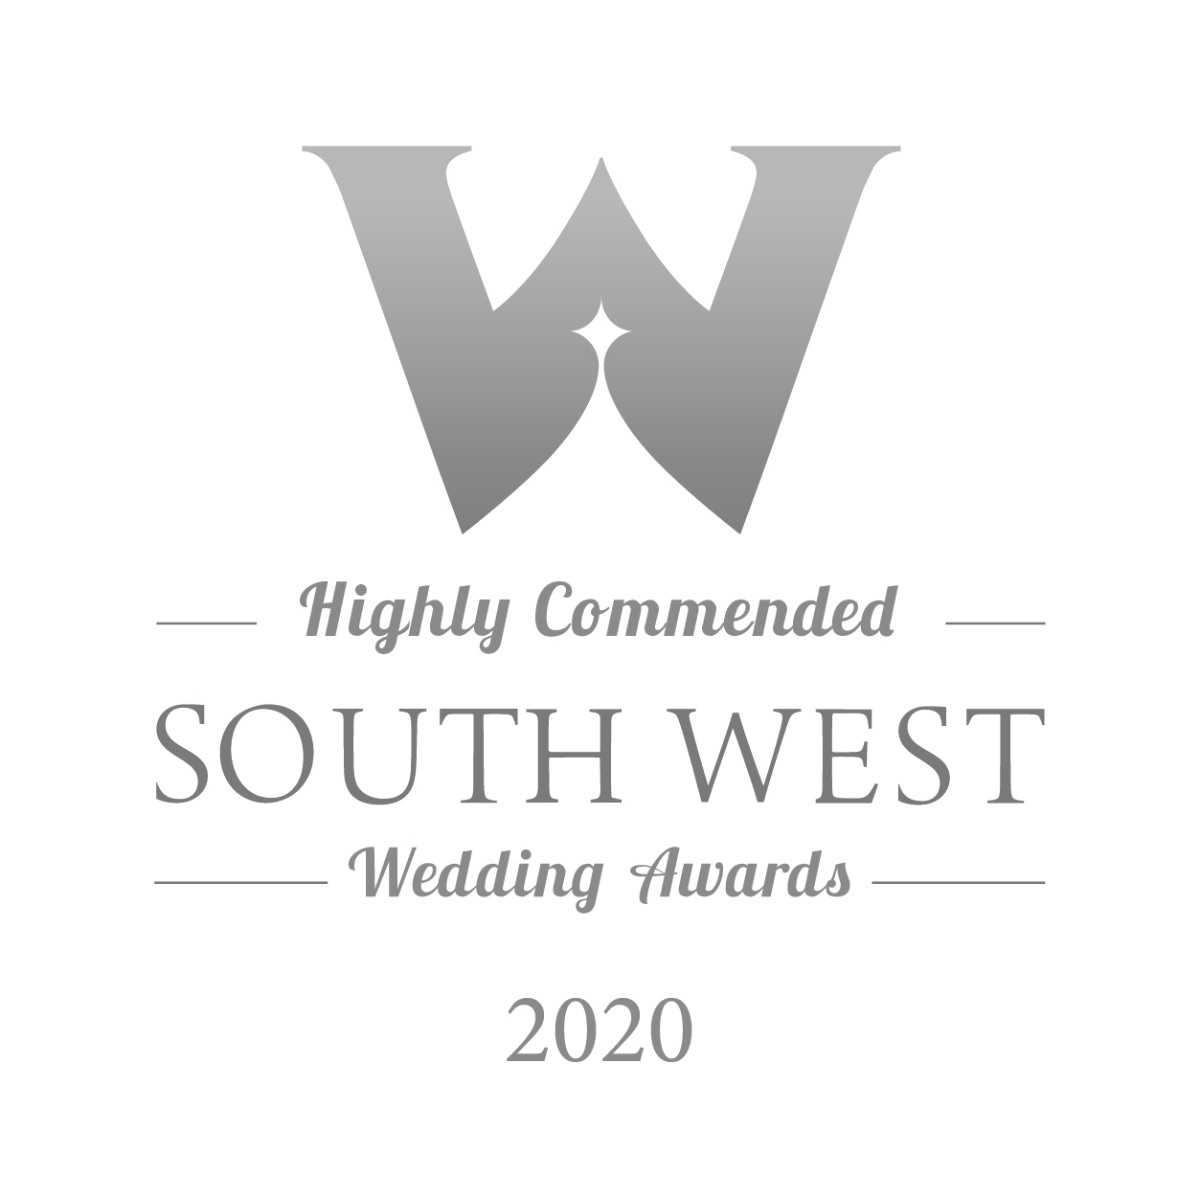 Highly Commended for Country Venues at the South West Wedding Awards